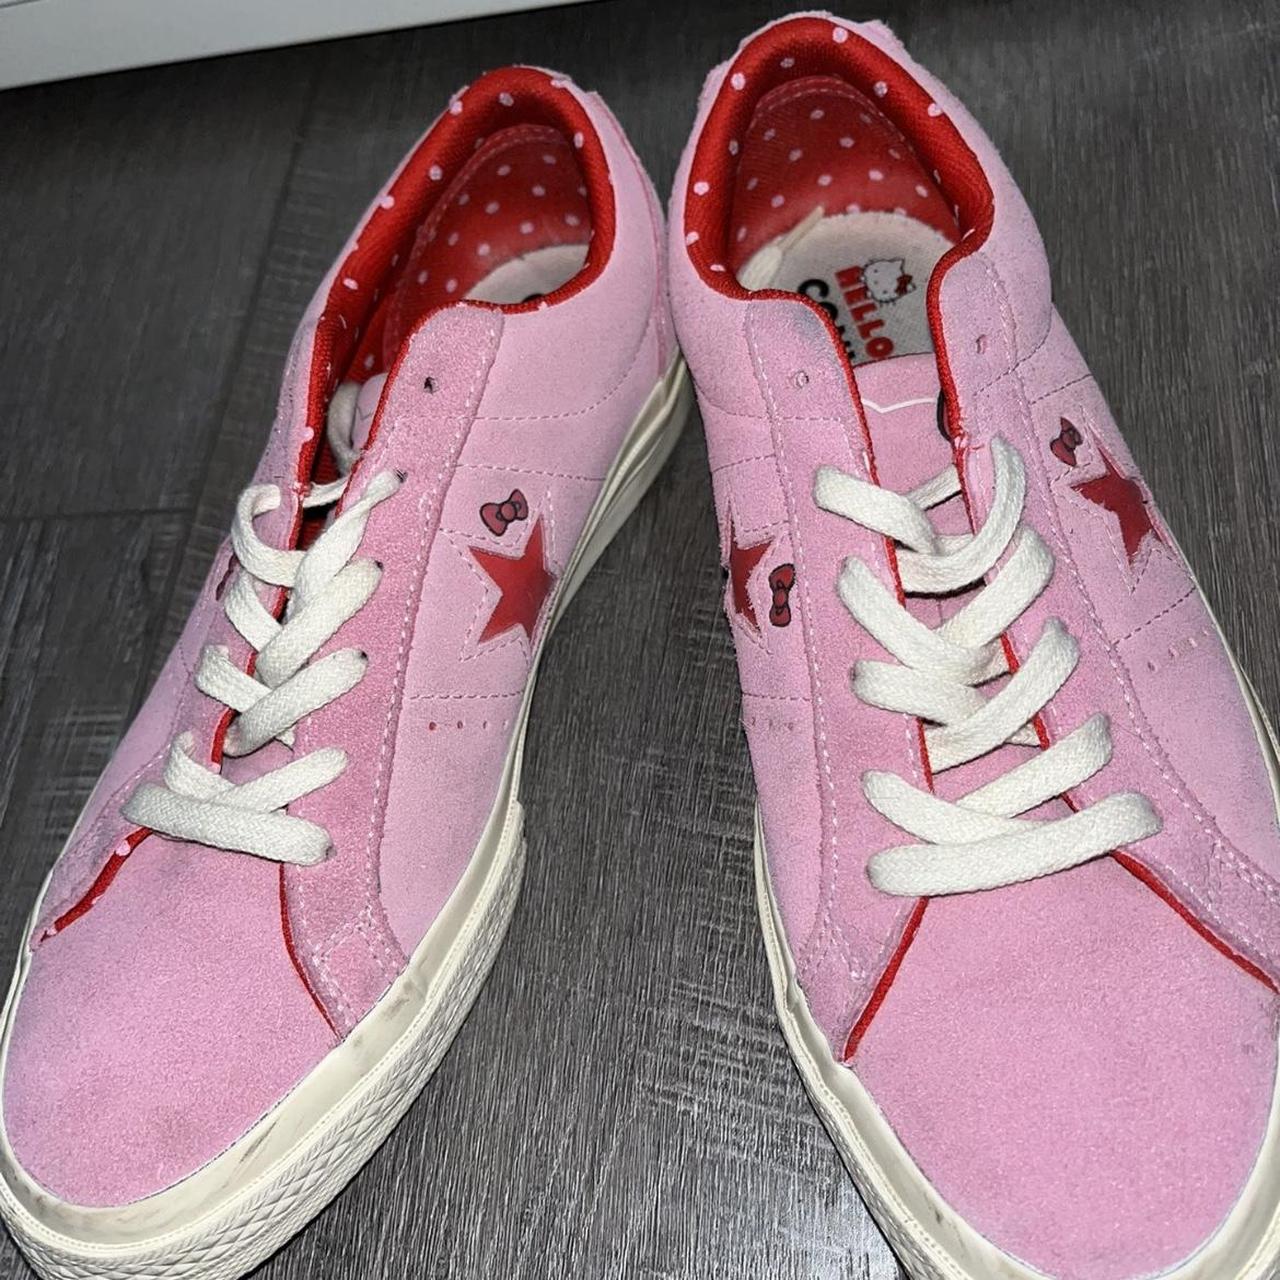 HELLO KITTY X ONE STAR SUEDE LOW TOP ‘Prism Pink’... - Depop